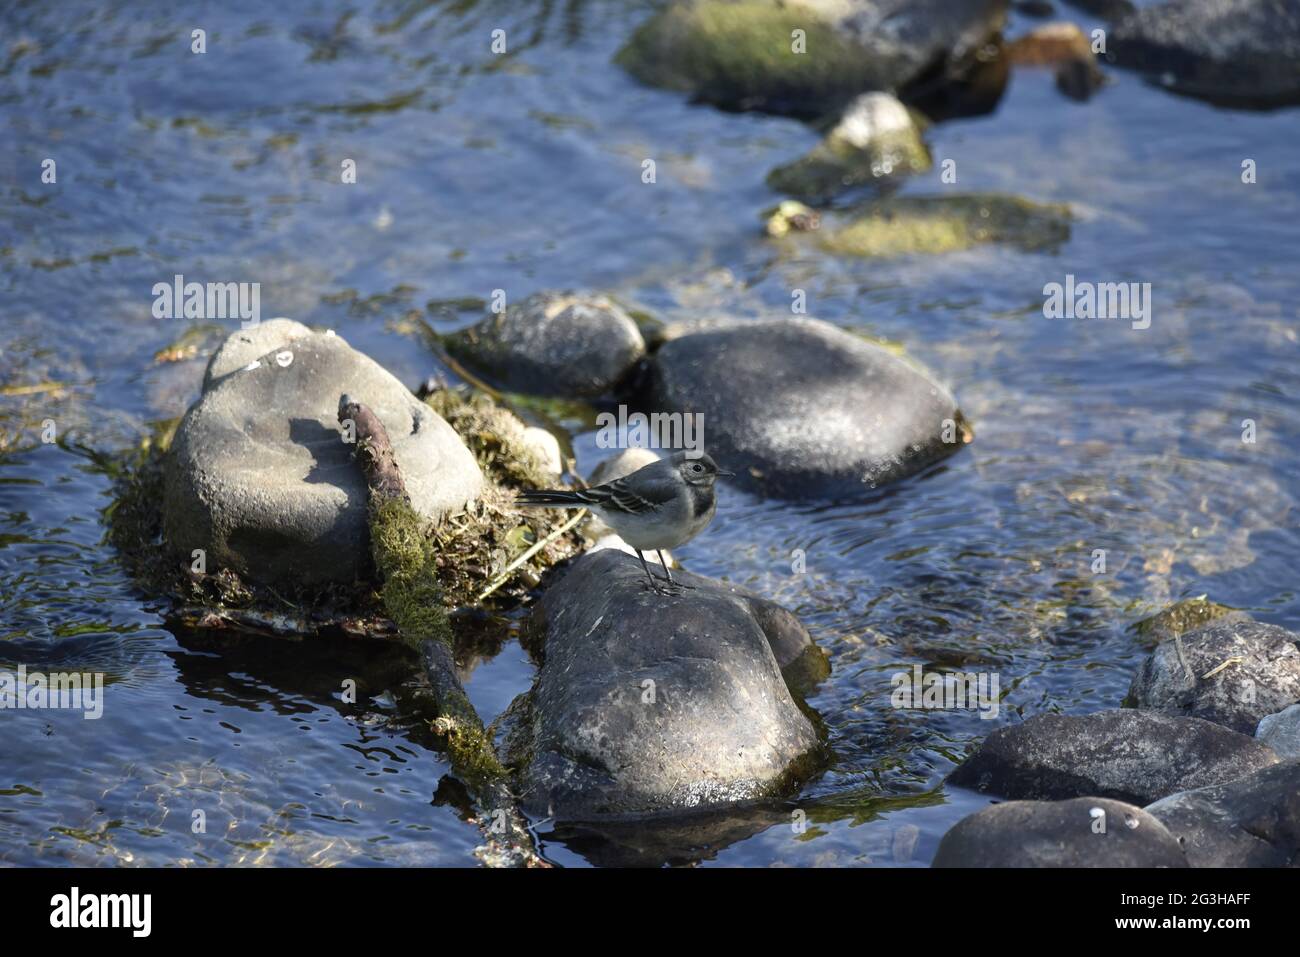 Juvenile Pied Wagtail (Motocilla alba) Standng on a Stone in the Middle of a Slow Flowing River Rhiw in Wales on a Sunny June Day Stock Photo